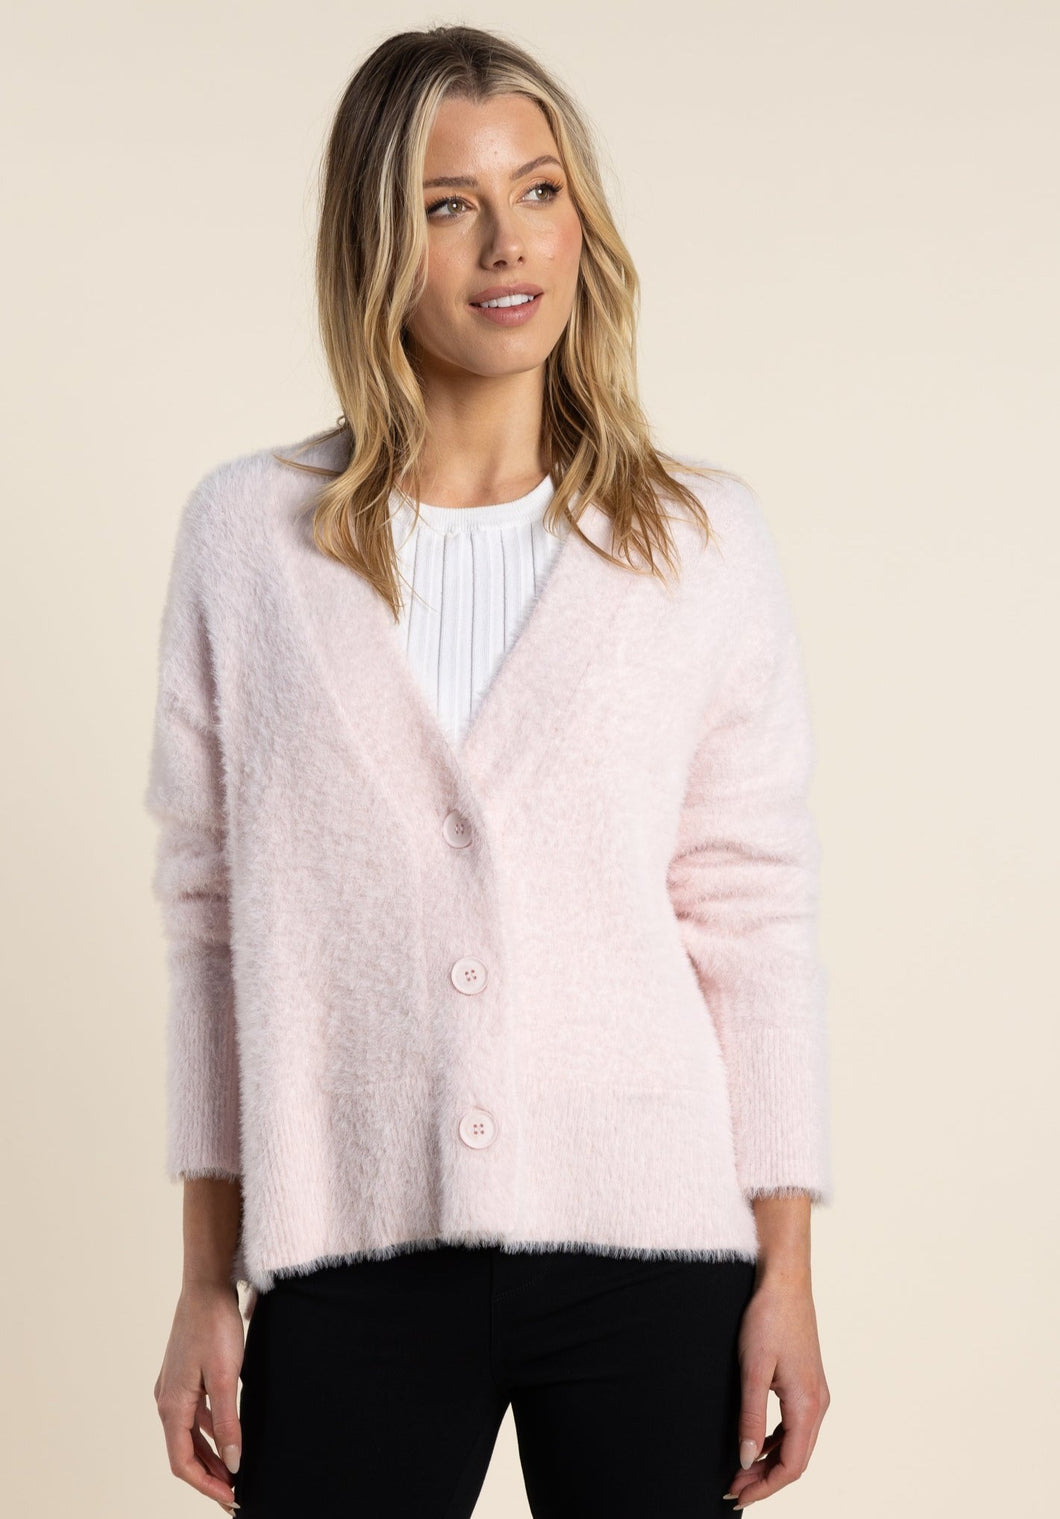 Two T's   Fluffy Cardigan   Pale Pink     - Size :  L